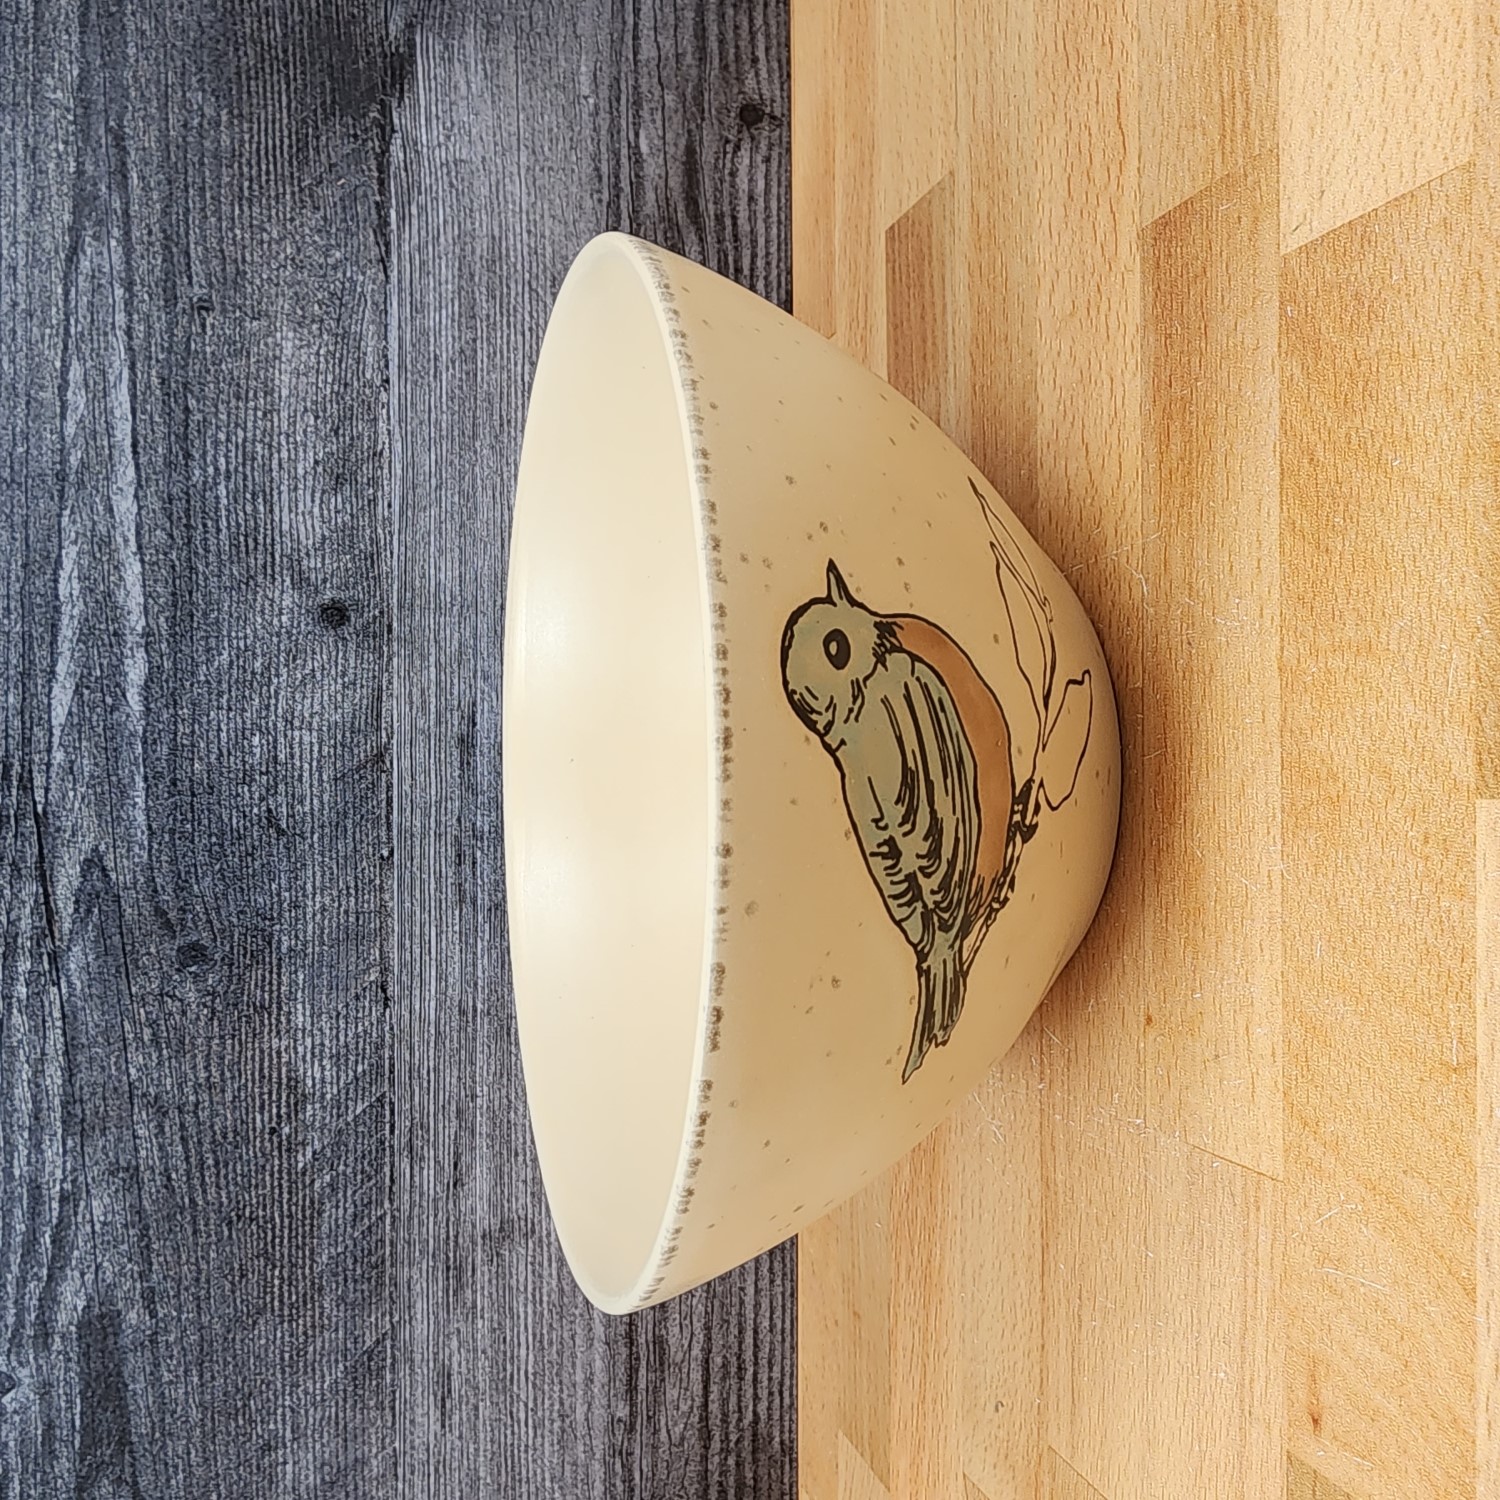 This Bird Reactive Embossed Serving Bowl Decorative by Blue Sky 8in (20cm) is made with love by Premier Homegoods! Shop more unique gift ideas today with Spots Initiatives, the best way to support creators.